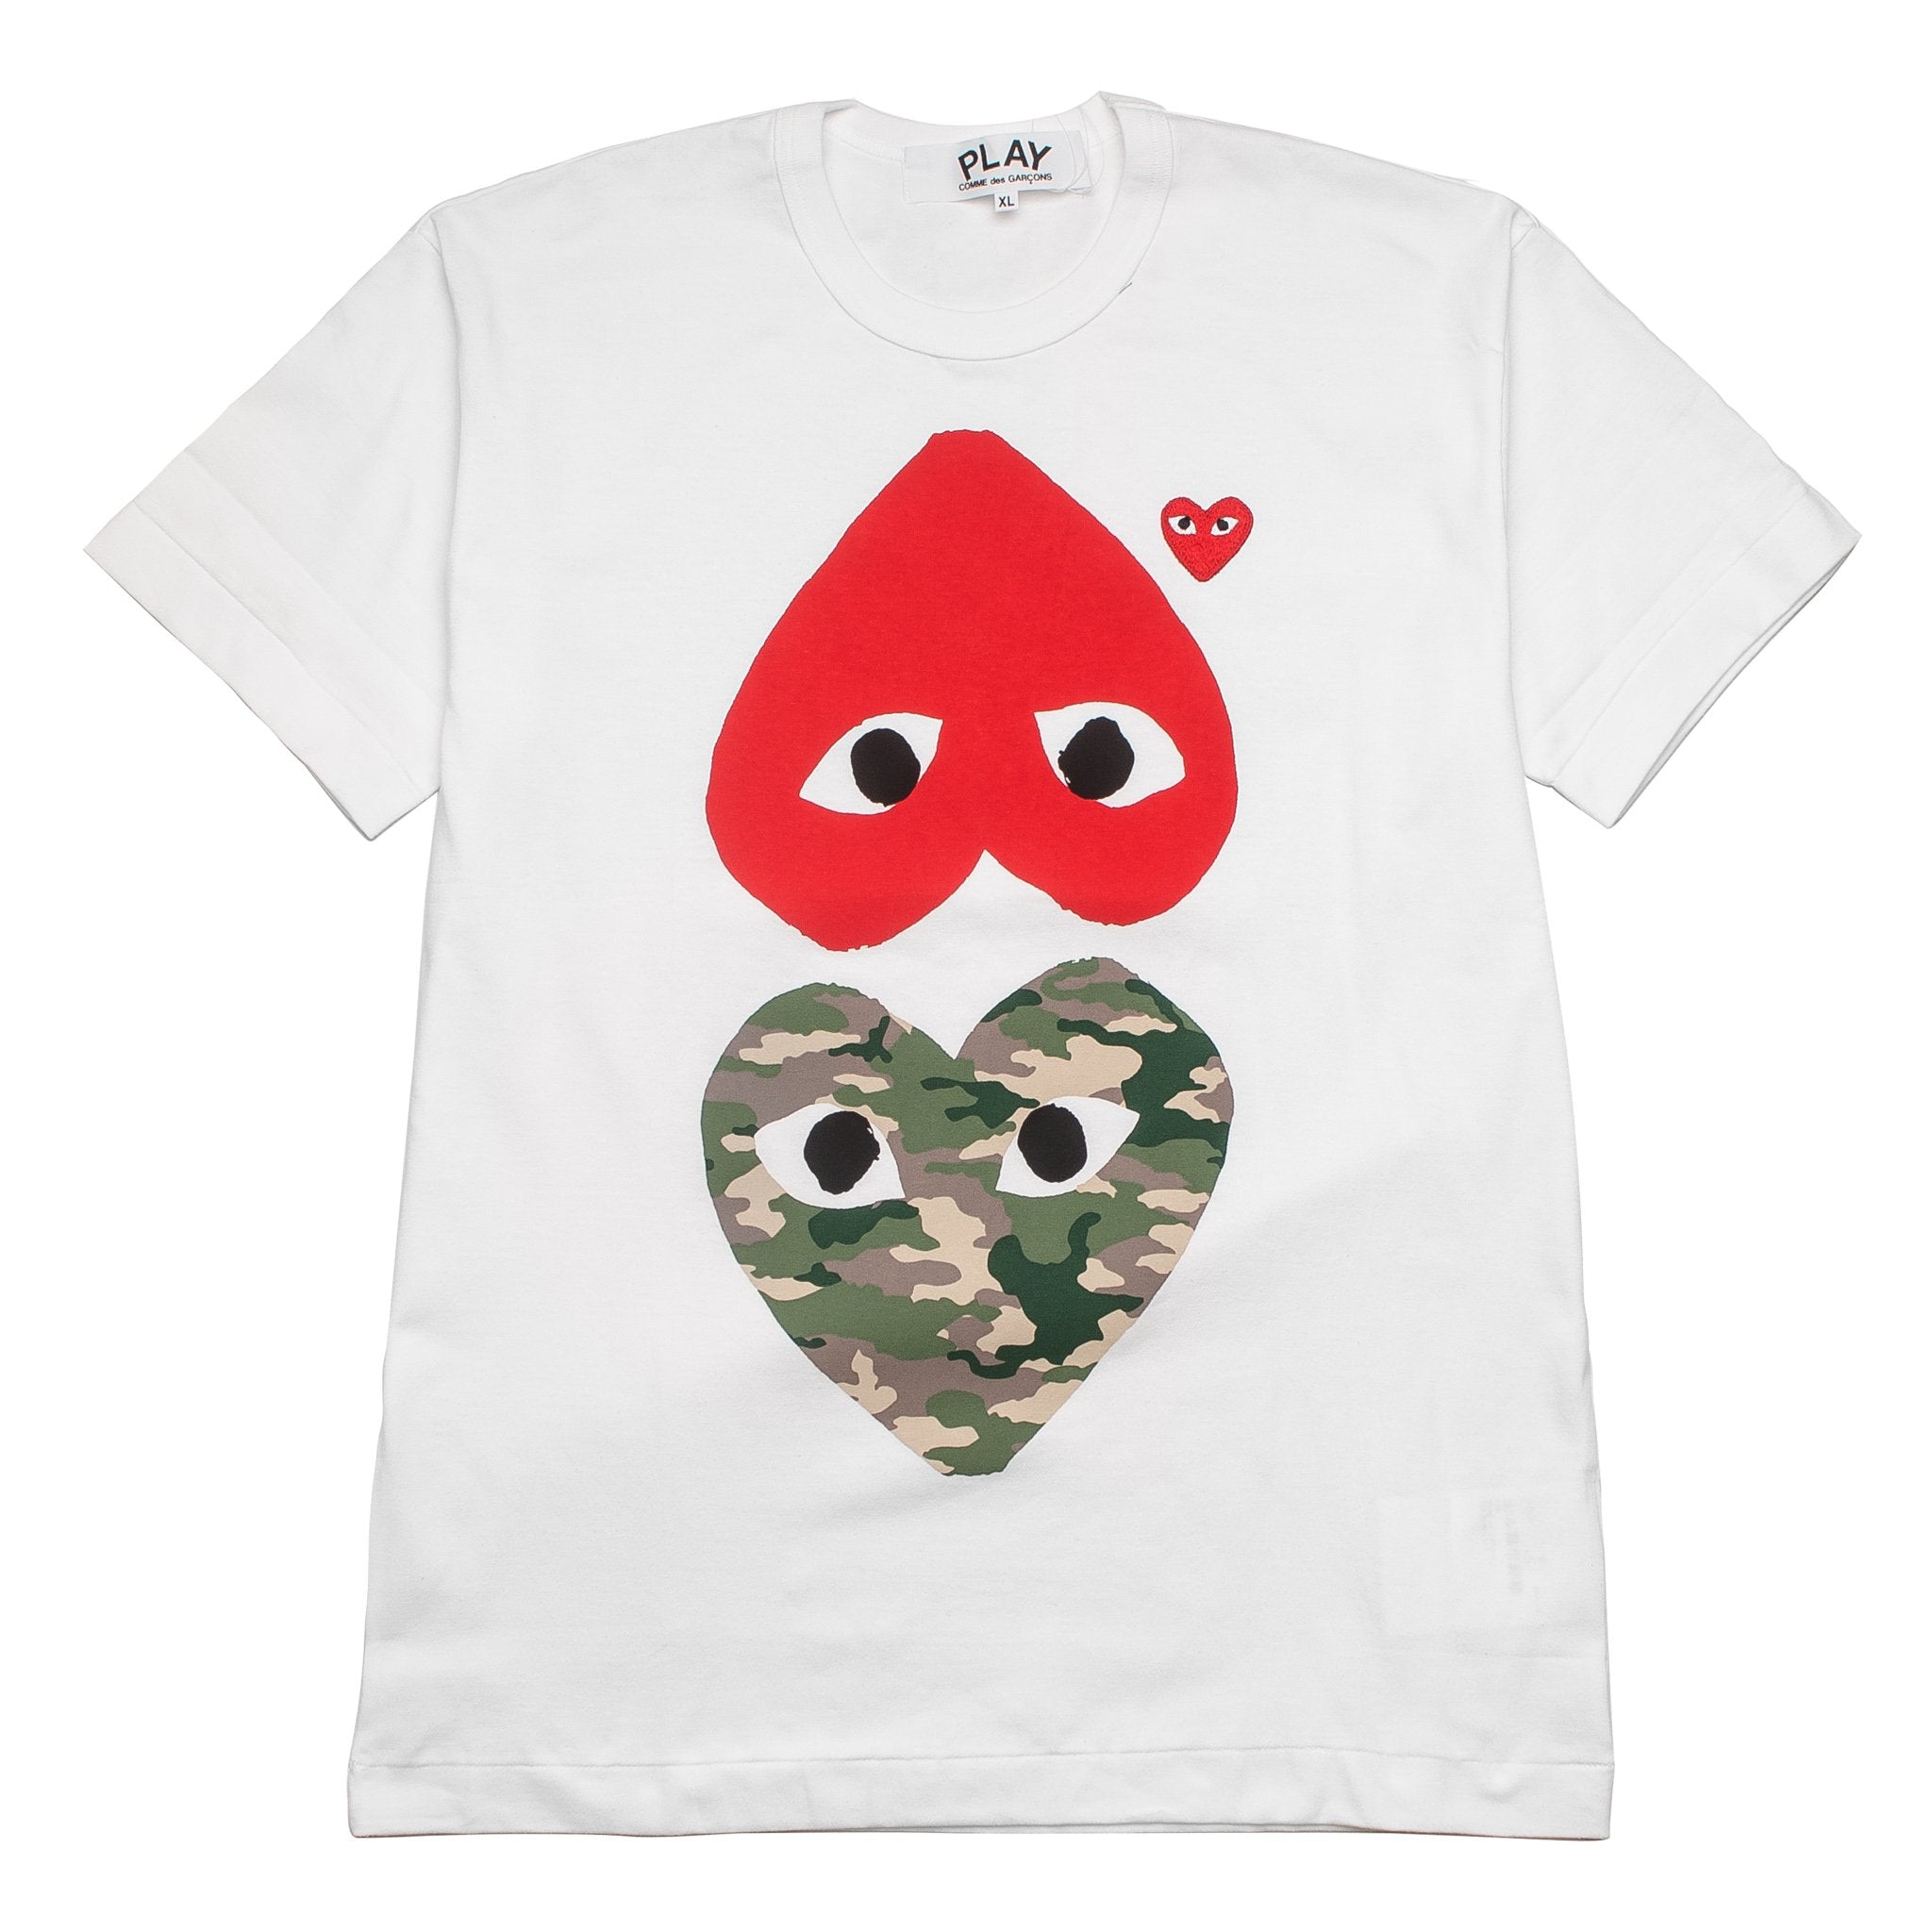 comme des garcons play inverted heart logo tee